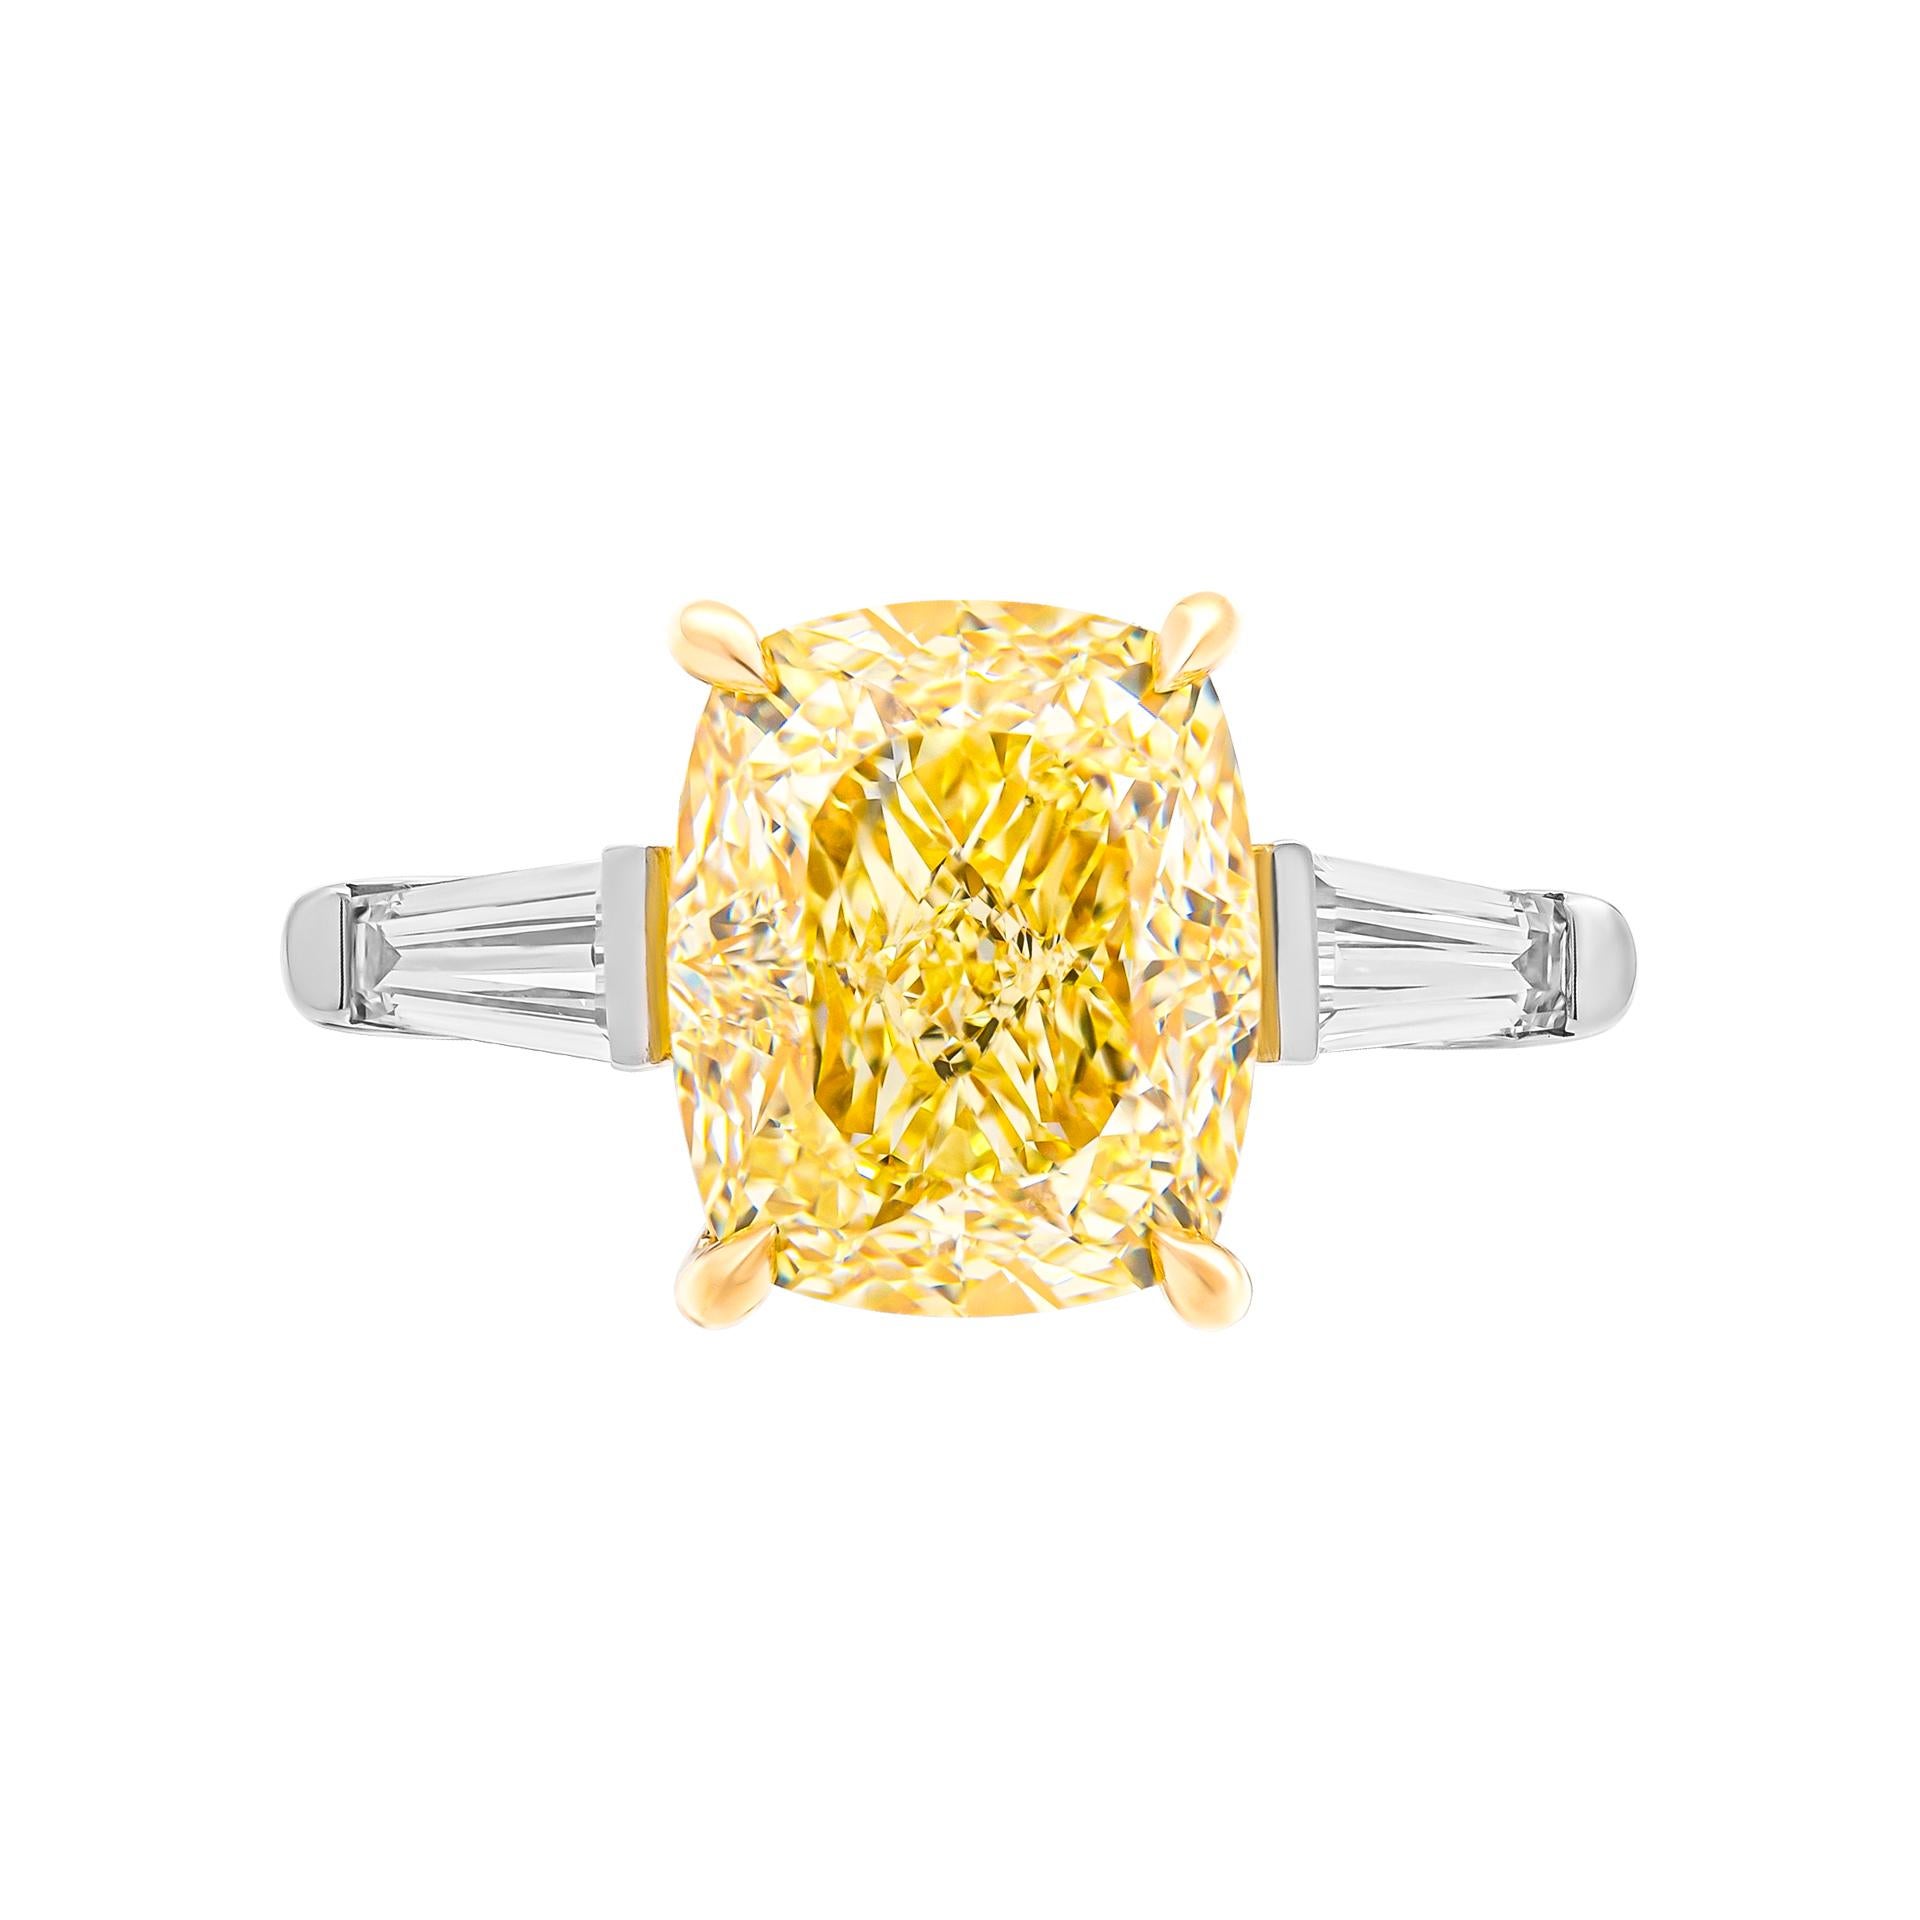 3 stone ring in Platinum & 18K Yellow Gold
Center stone: 5.24ct Fancy Light Yellow VS2 Cushion Shape Diamond GIA#7432512211 
Side stones: 0.56ct F VS tapered baguettes
Total Carat Weight yellow stones: 0.06ct 
Total Carat Weight white stones: